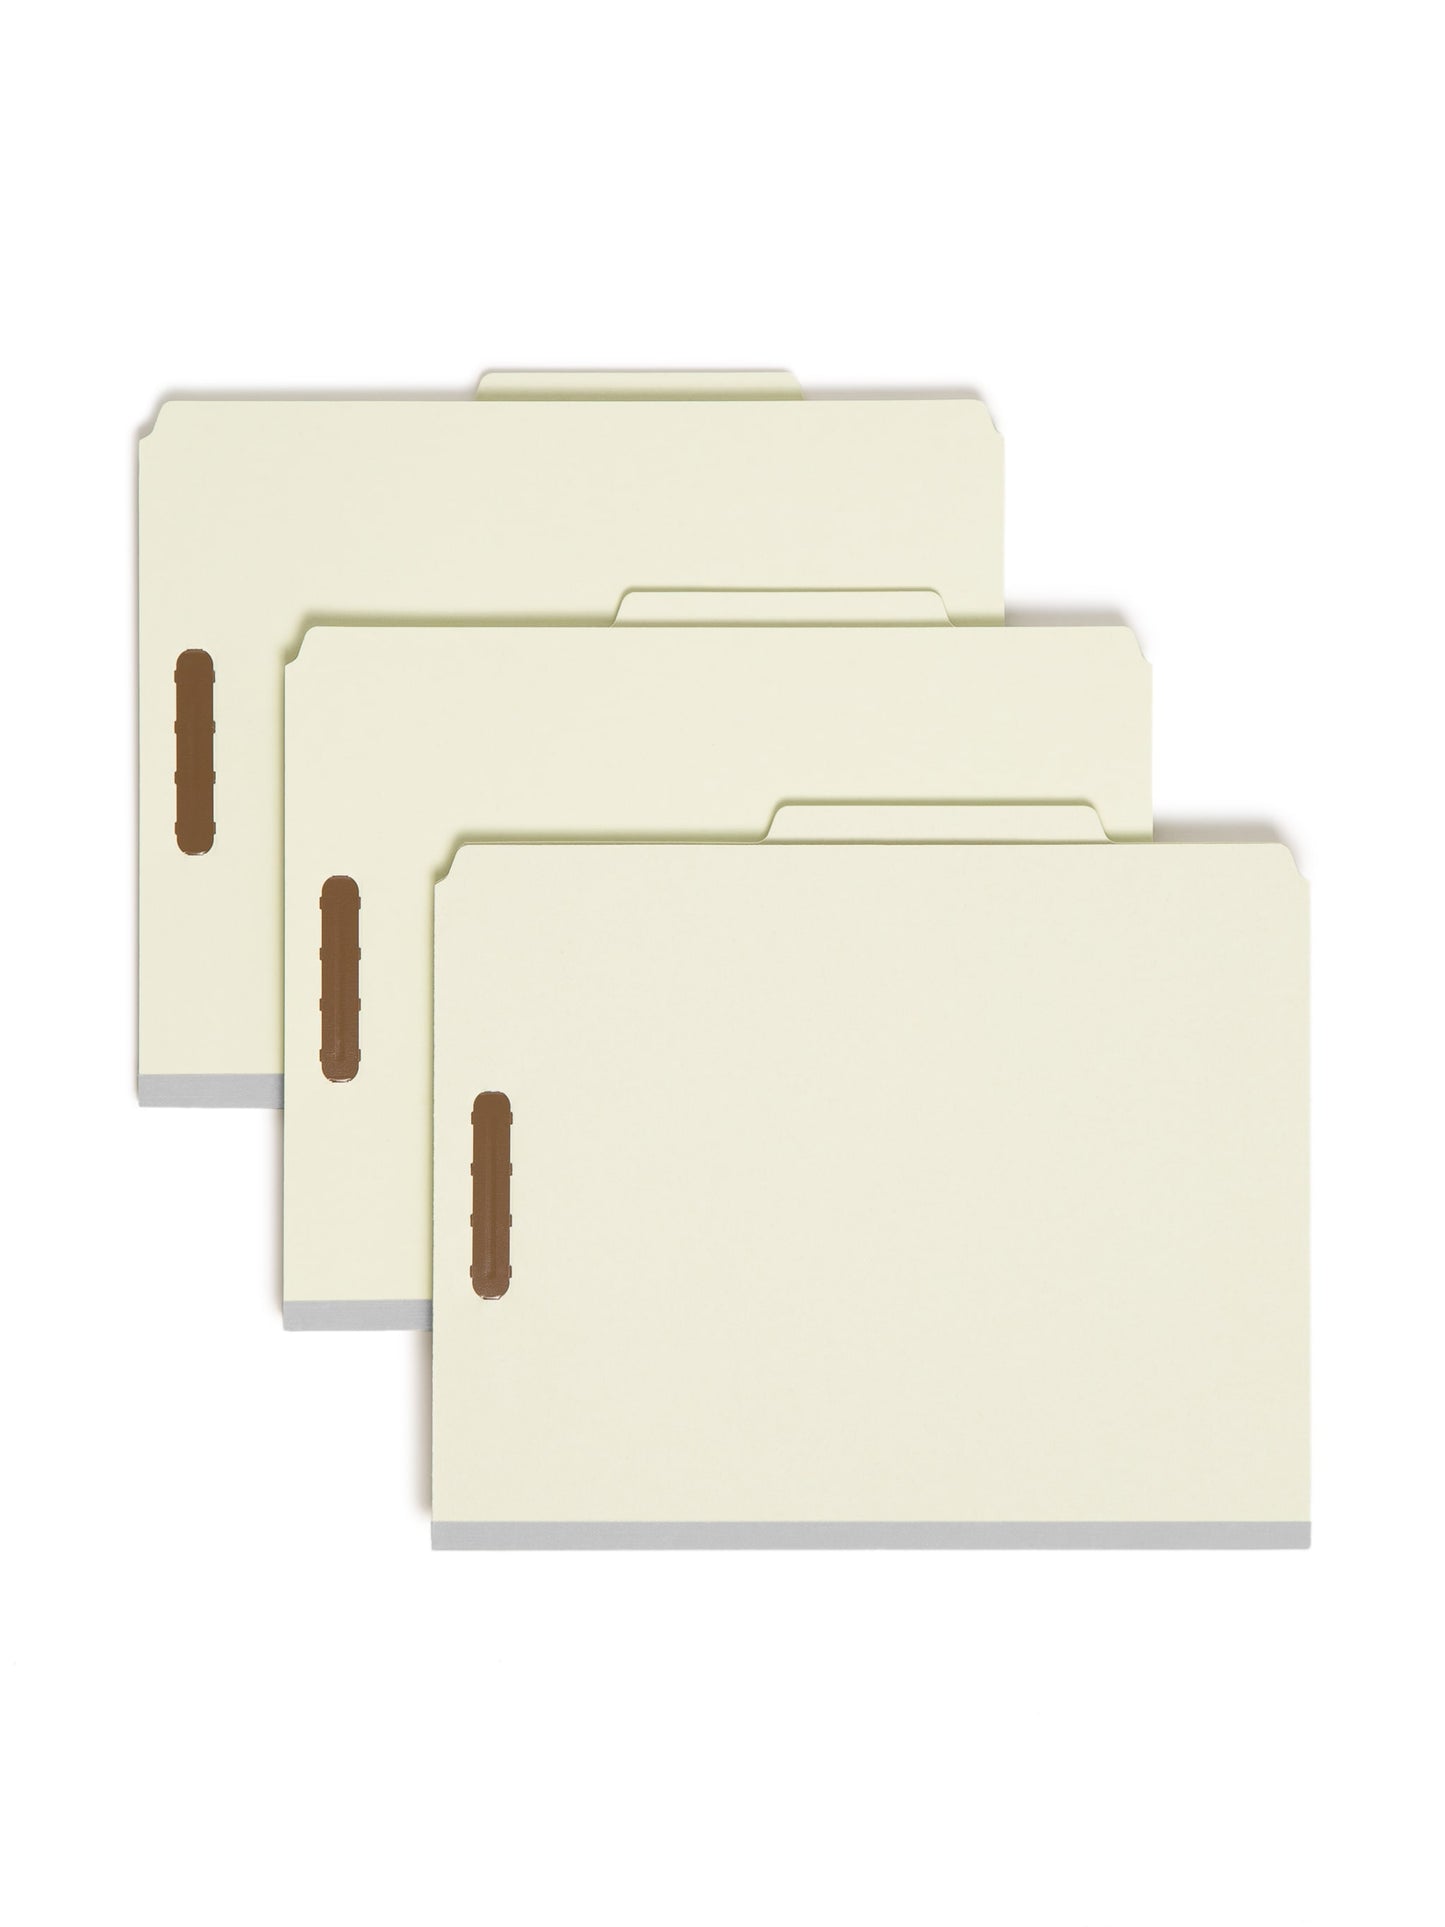 100% Recycled Value Pressboard Colored Classification Folders, 2/5 Cut Tab, 2 inch Expansion, 1 Divider, Gray/Green Color, Letter Size, Set of 0, 30086486211810